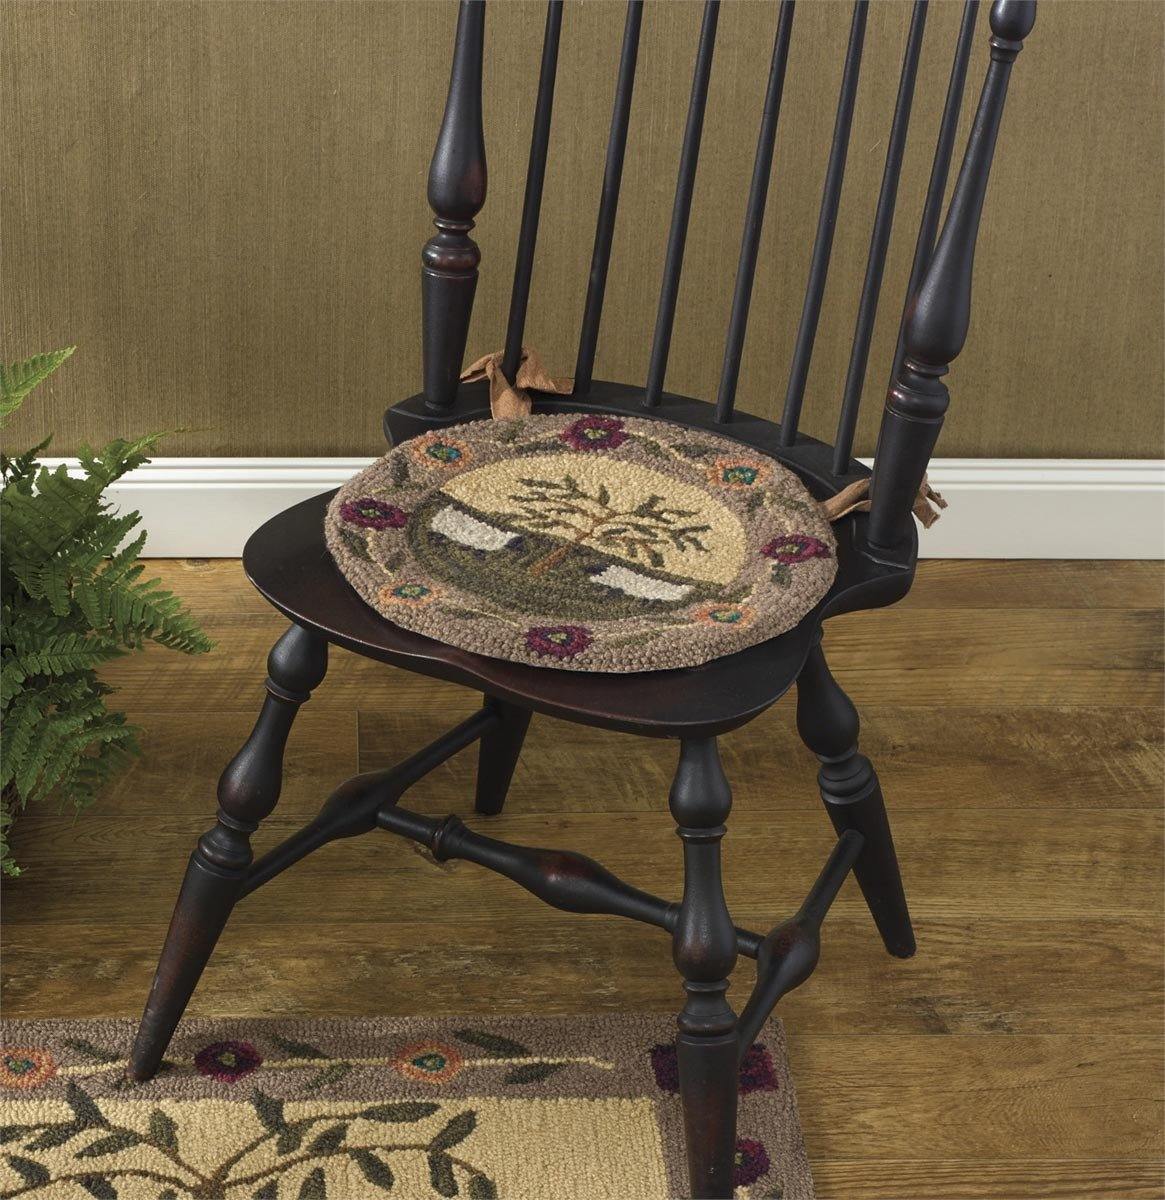 Willow & Sheep Hooked Chair Pad Park Designs - The Fox Decor